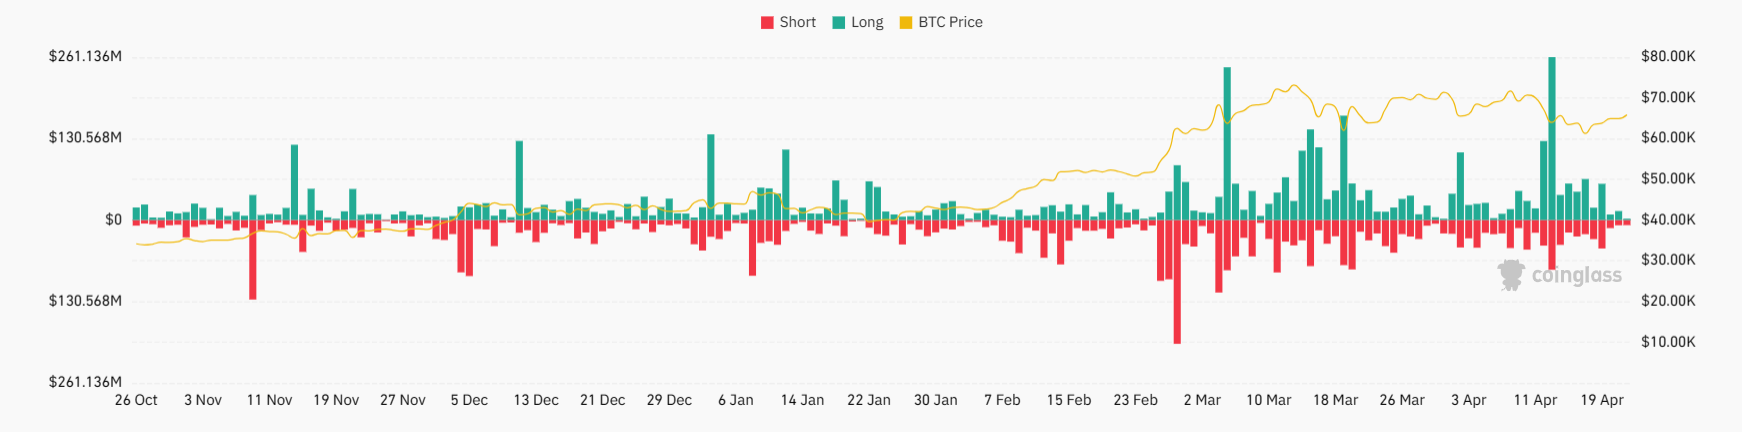 Market research report: Bitcoin looks to 66k post halving, fee volatility, supply on exchange falls - btc liquidations